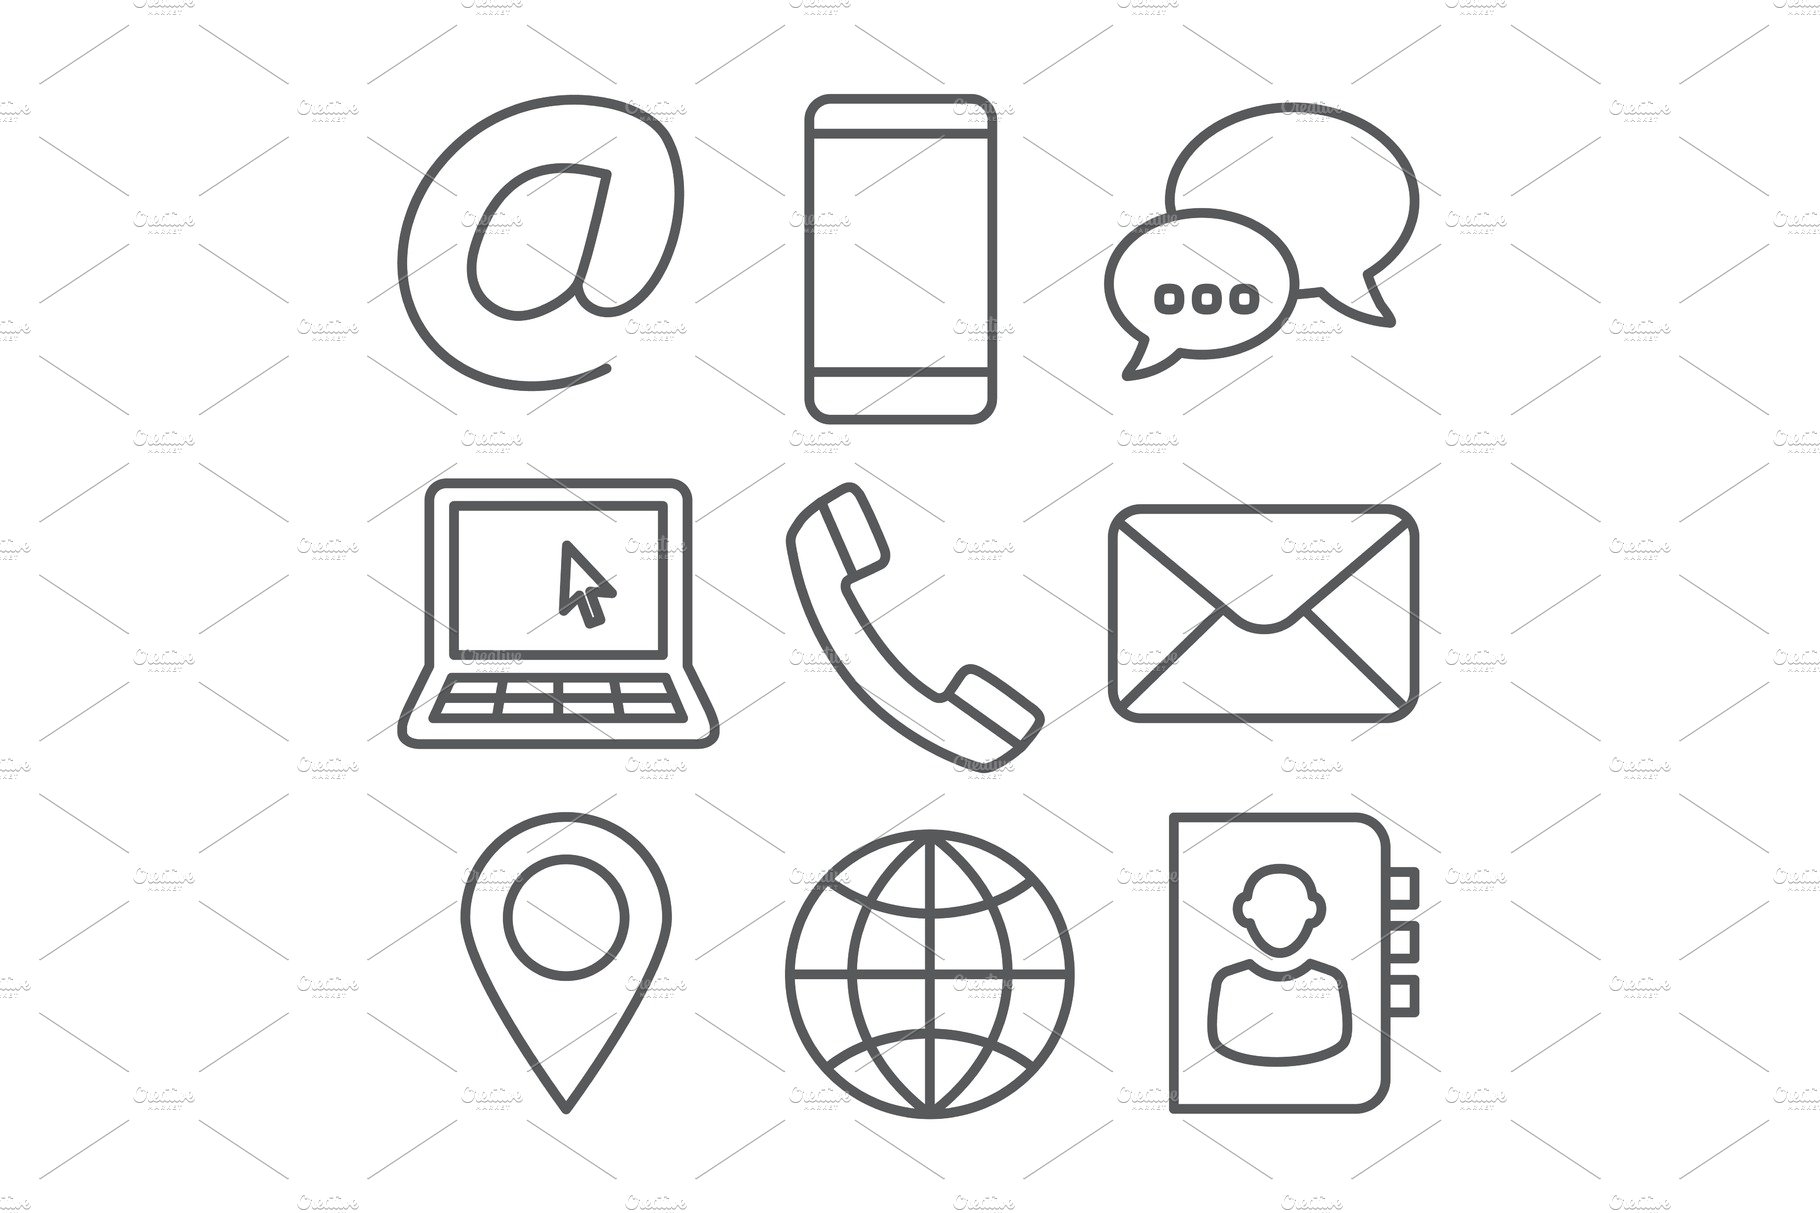 Contact line icons on white cover image.